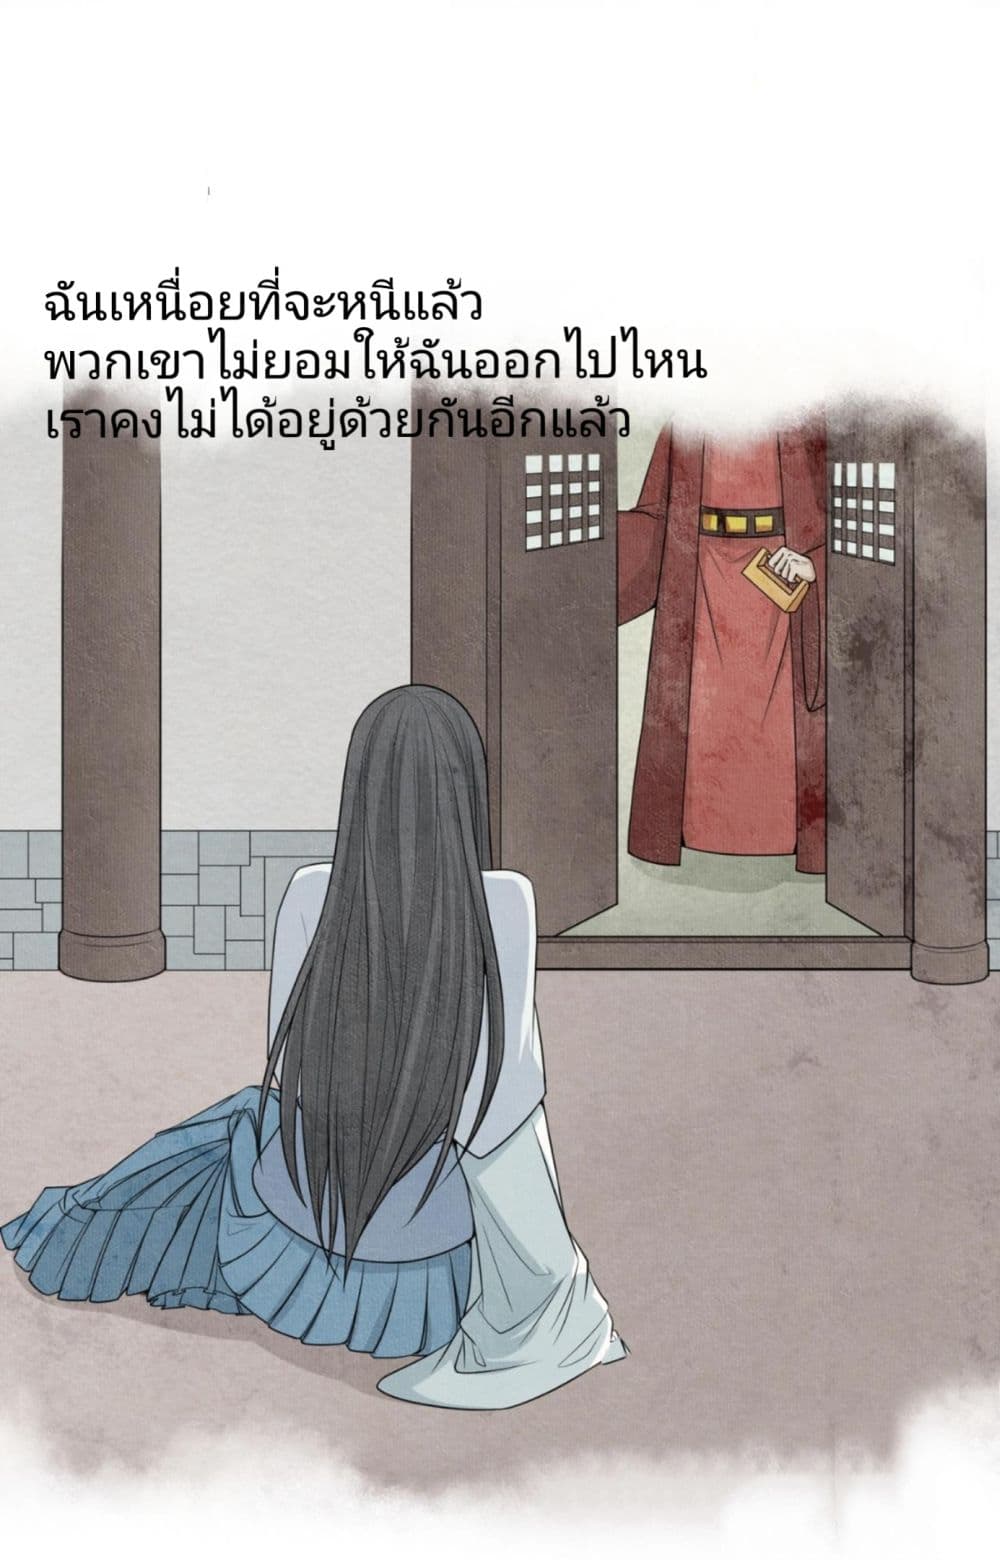 The Age of Ghost Spirits à¸à¸­à¸à¸à¸µà¹ 14 (33)